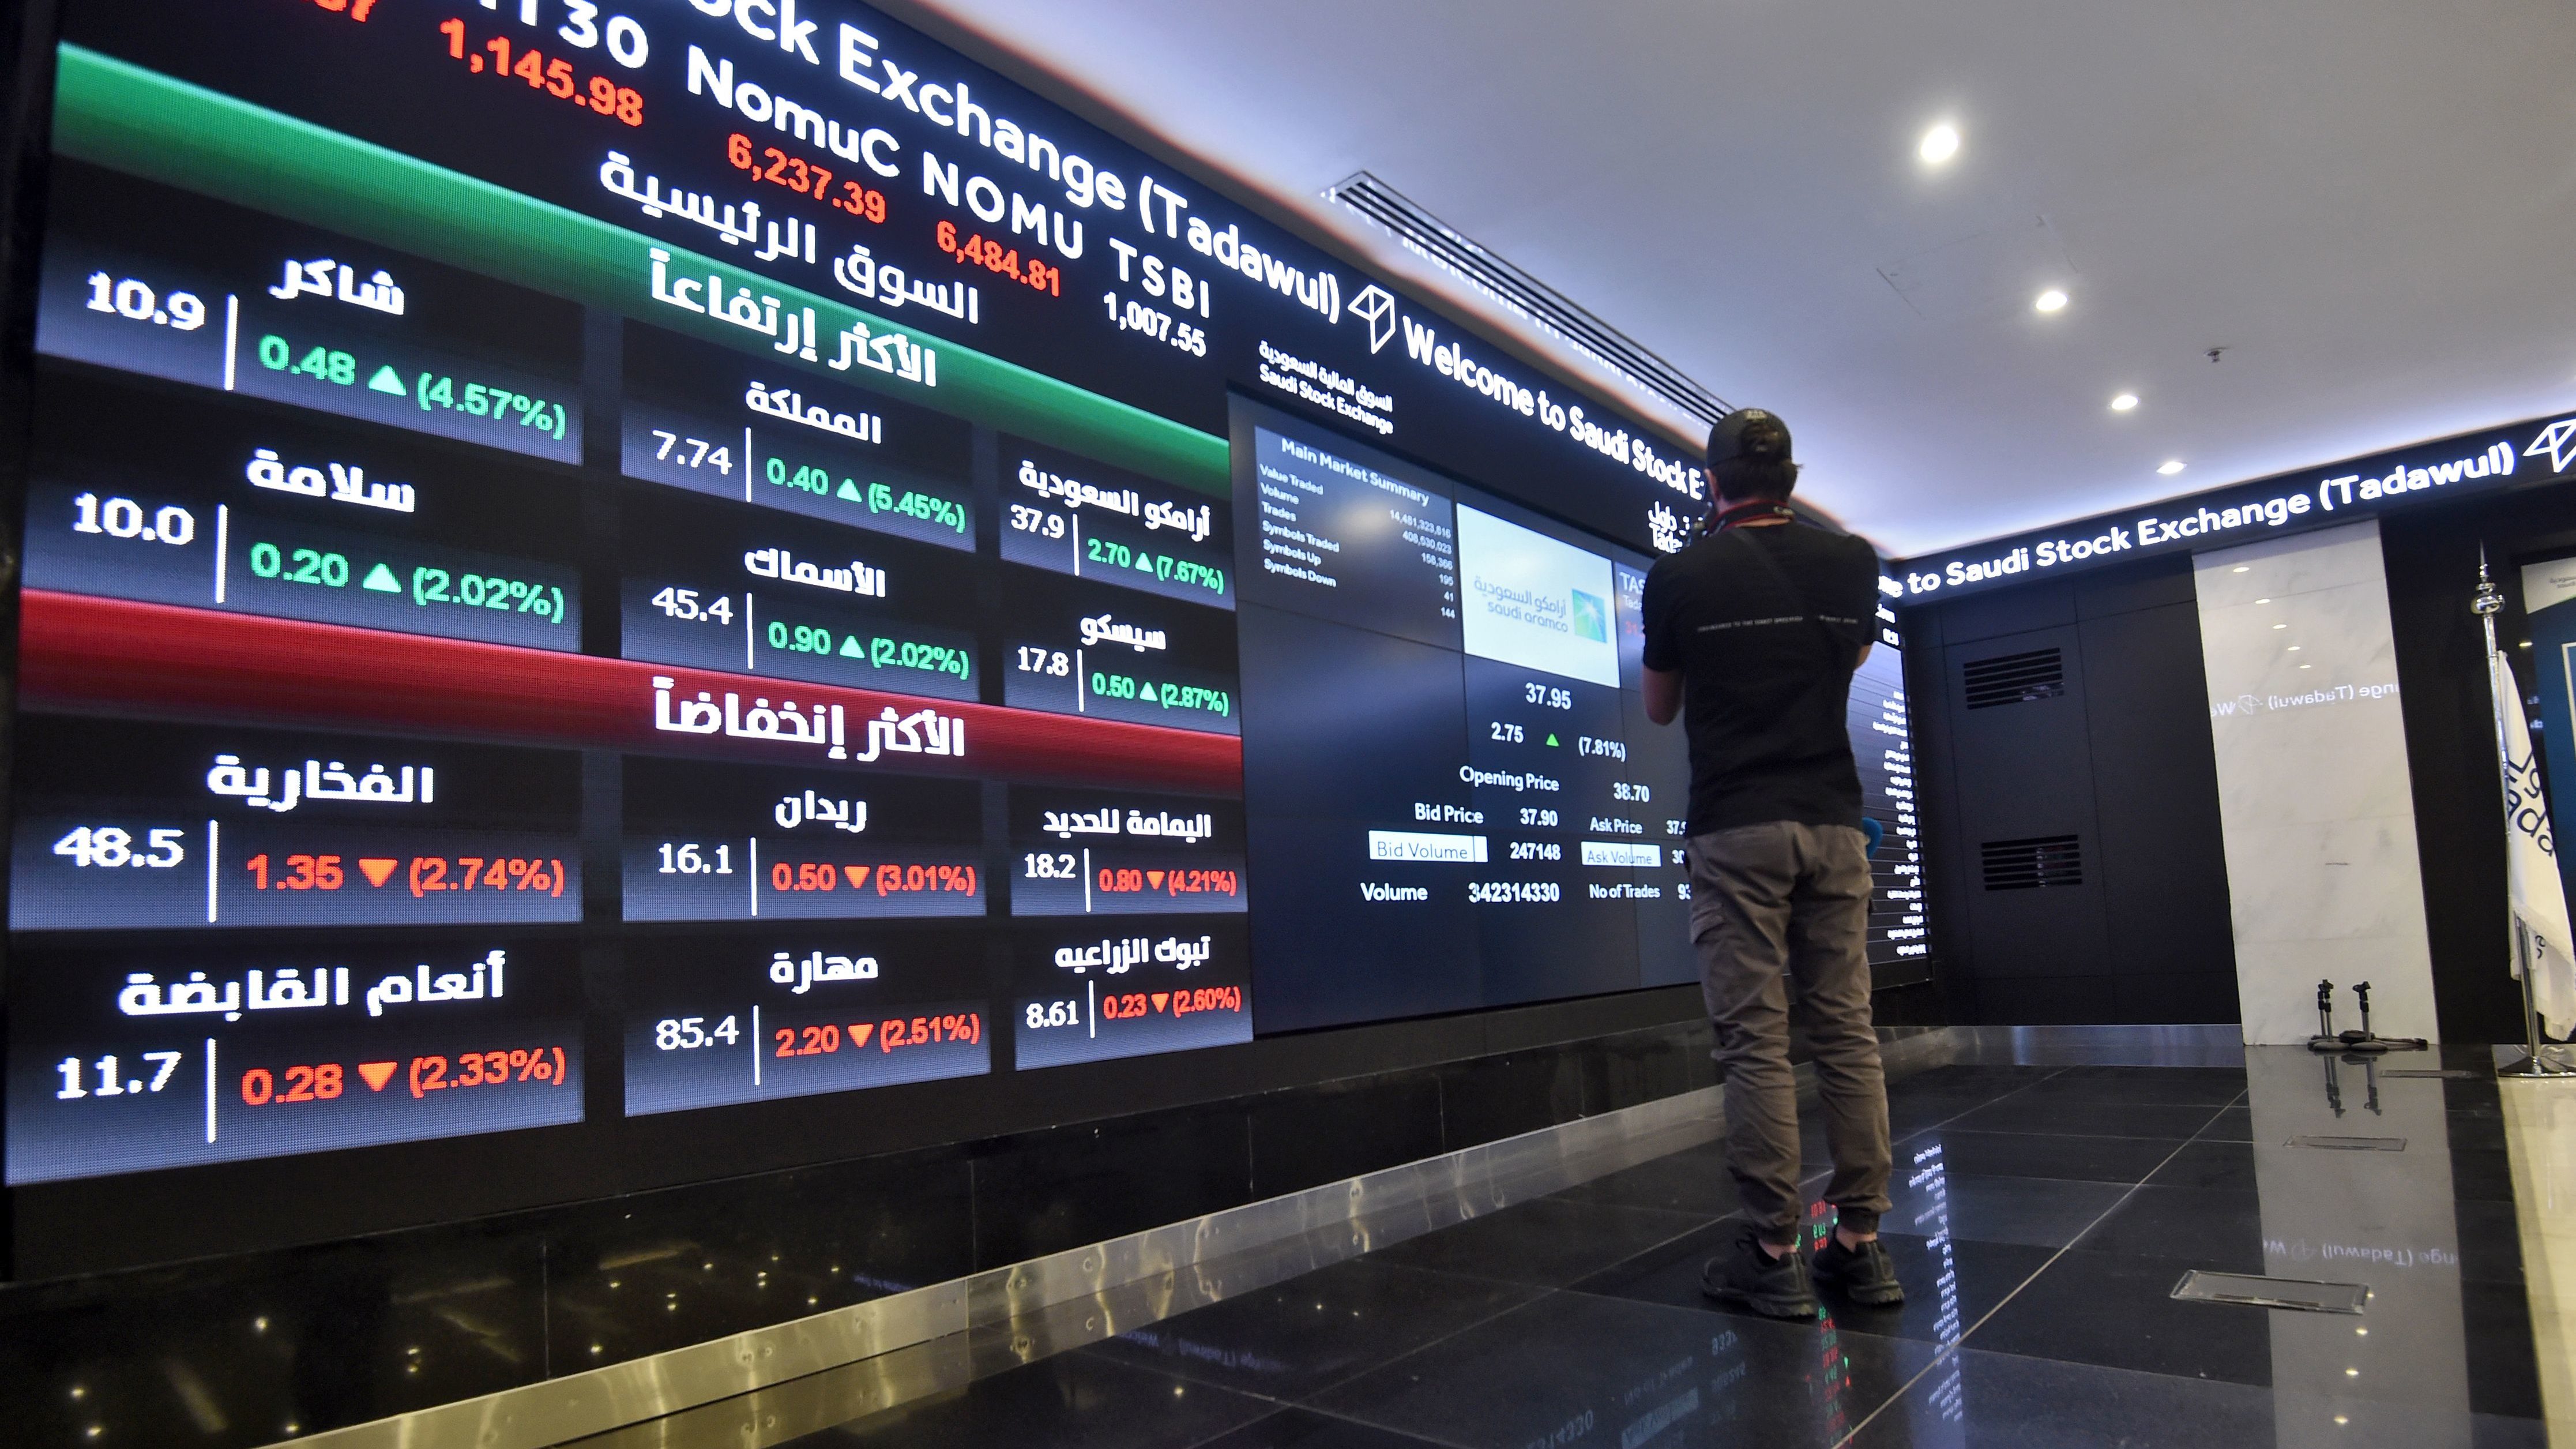 Gulf Stocks, Aramco Shares Plunge, Oil Prices Rise Amid US-Iran Tensions